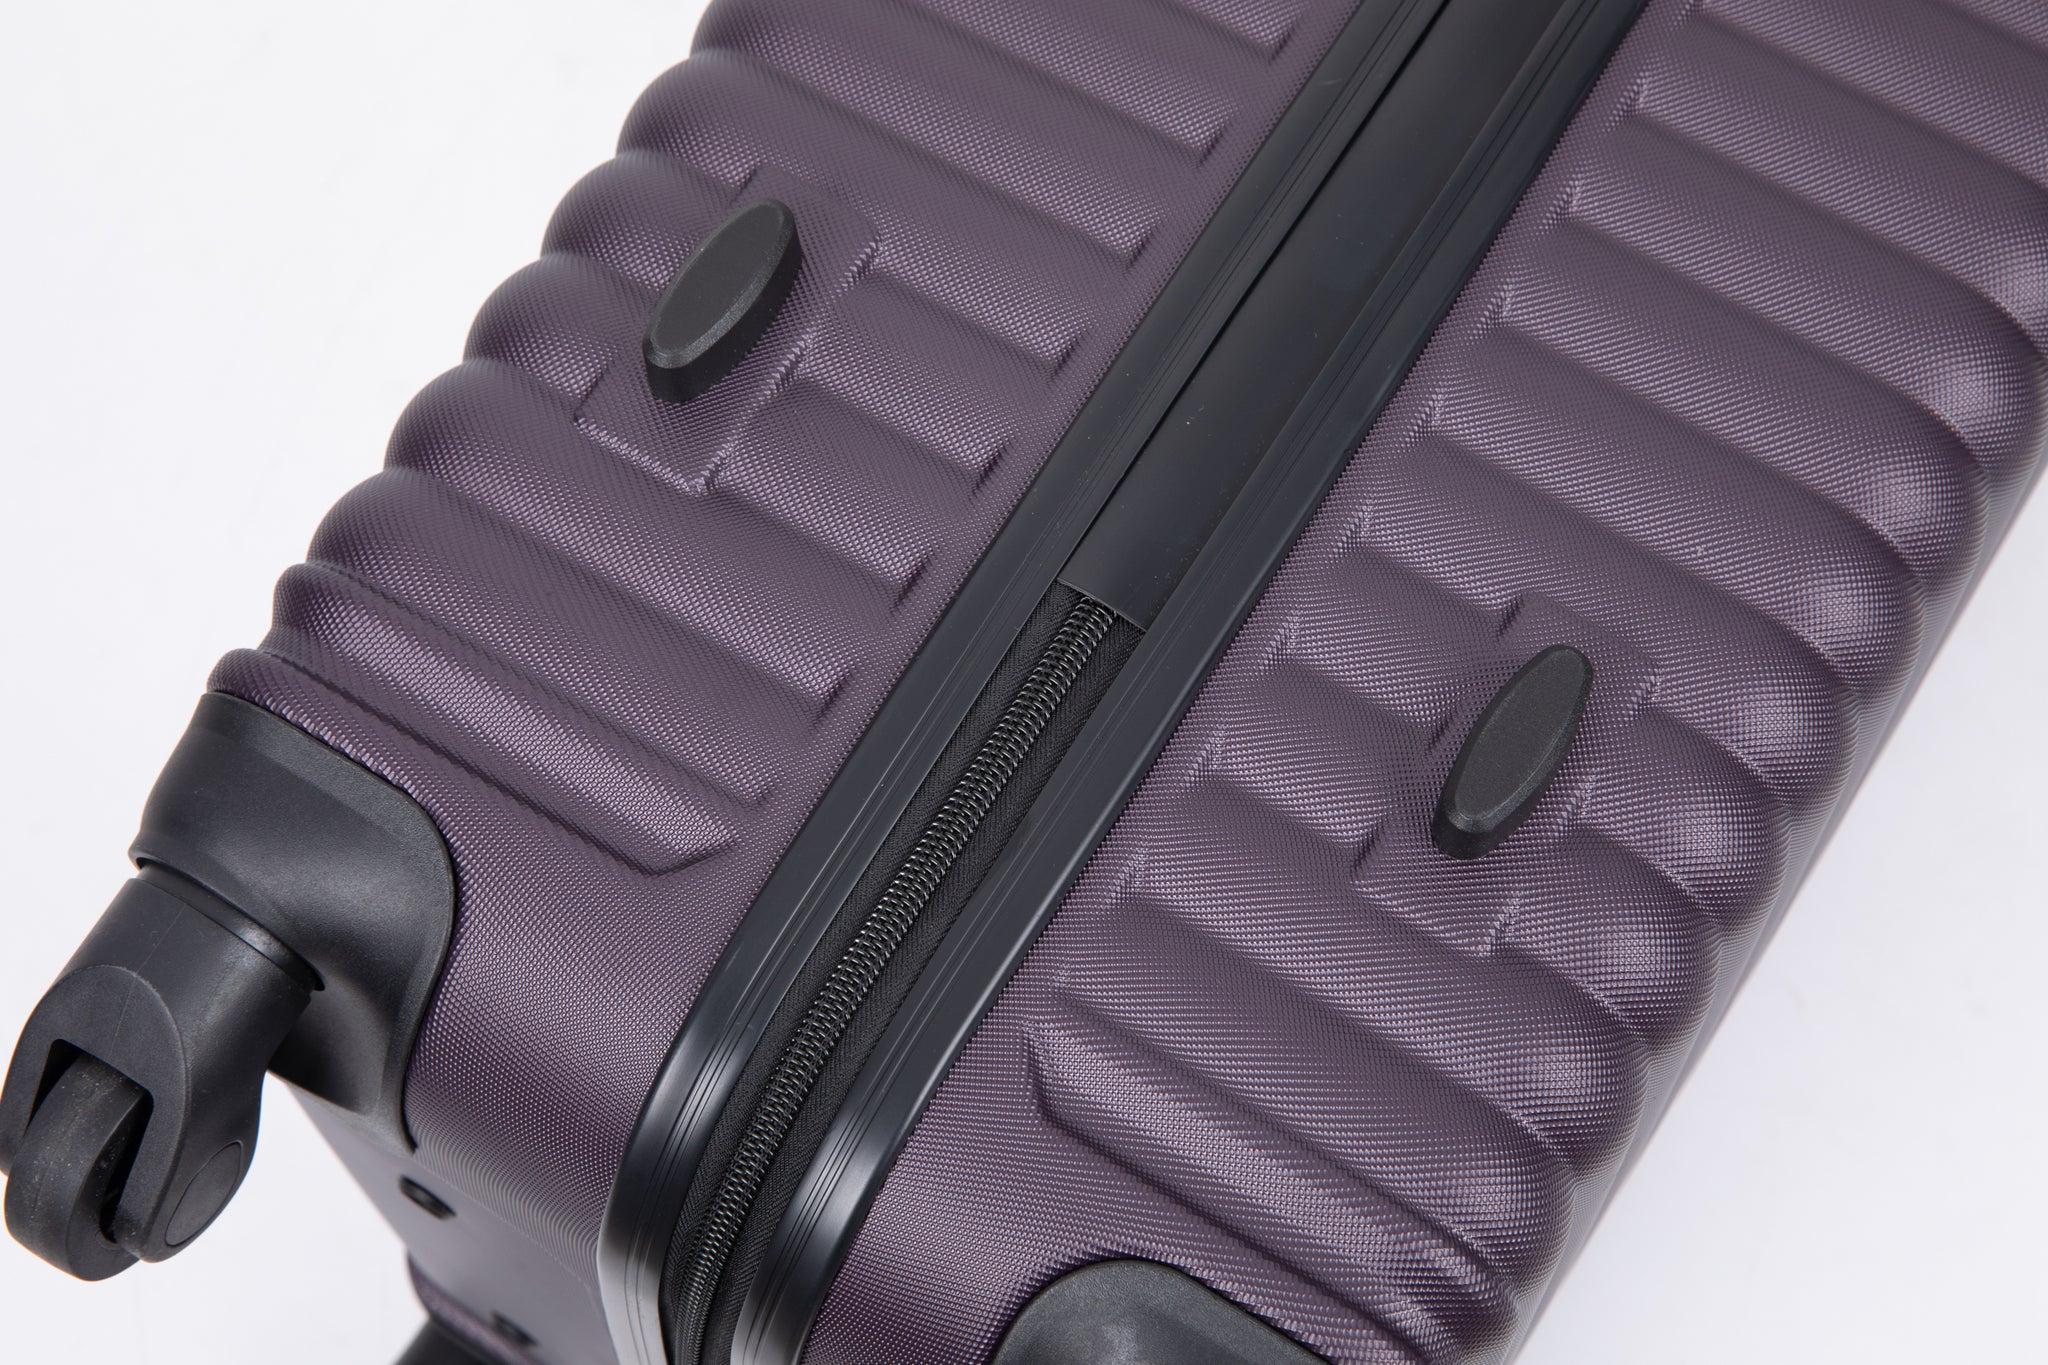 3 Piece Luggage Sets ABS Lightweight Suitcase with Two purple-abs